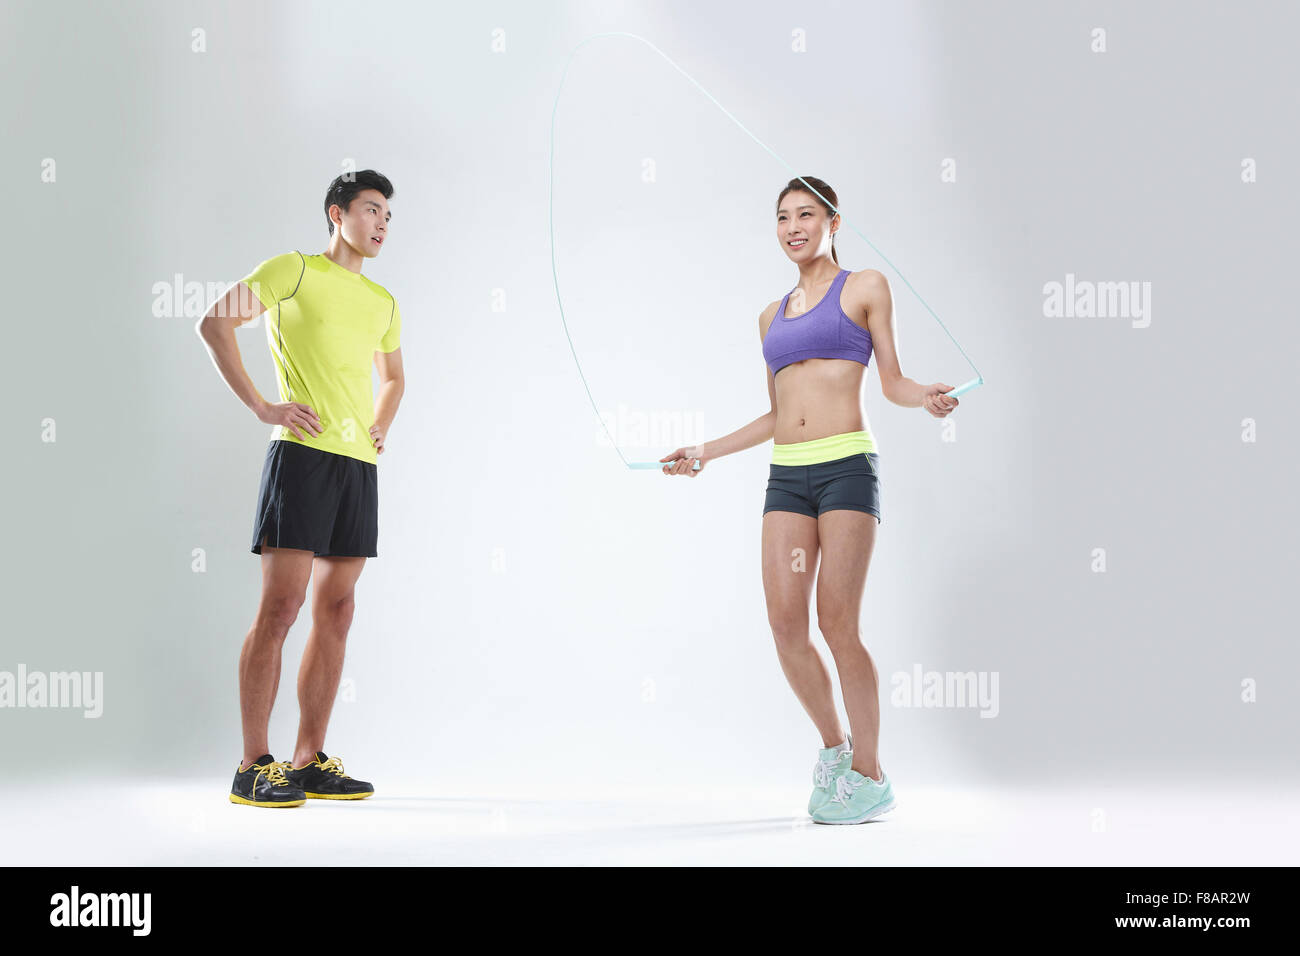 Man in sportswear standing with hands on waists, woman in sportswear jumping rope with a smile Stock Photo